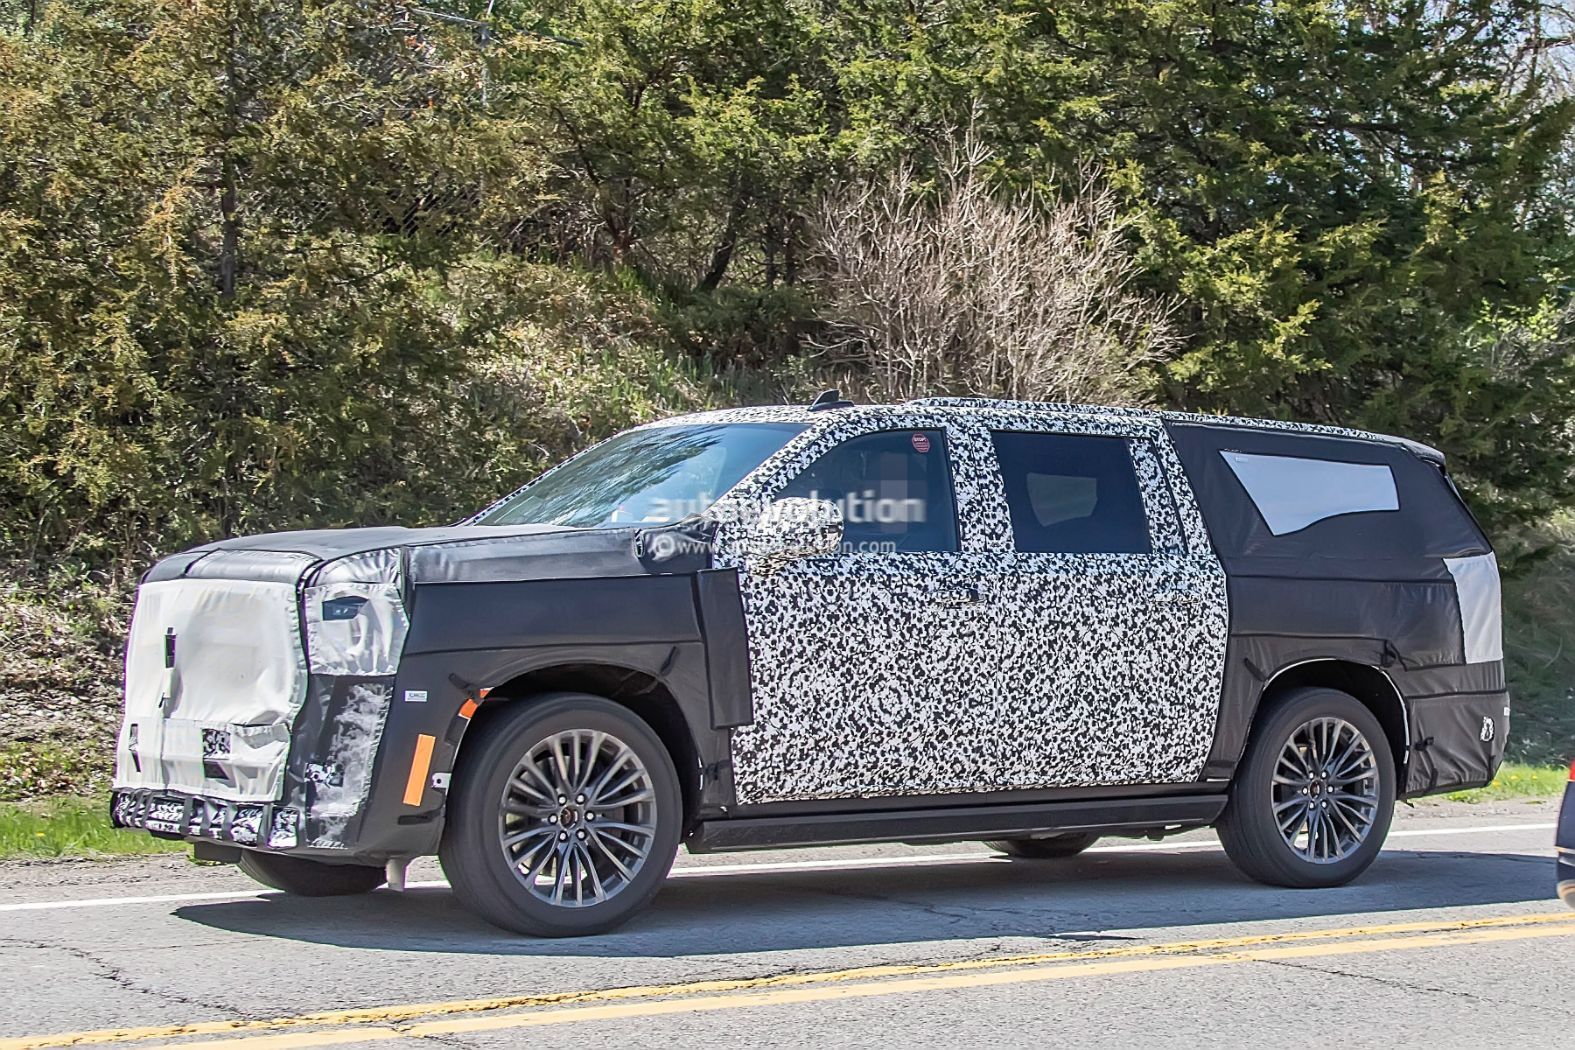 2023 Cadillac EscaladeV Blackwing Spy Video Confirms LT4 Supercharged